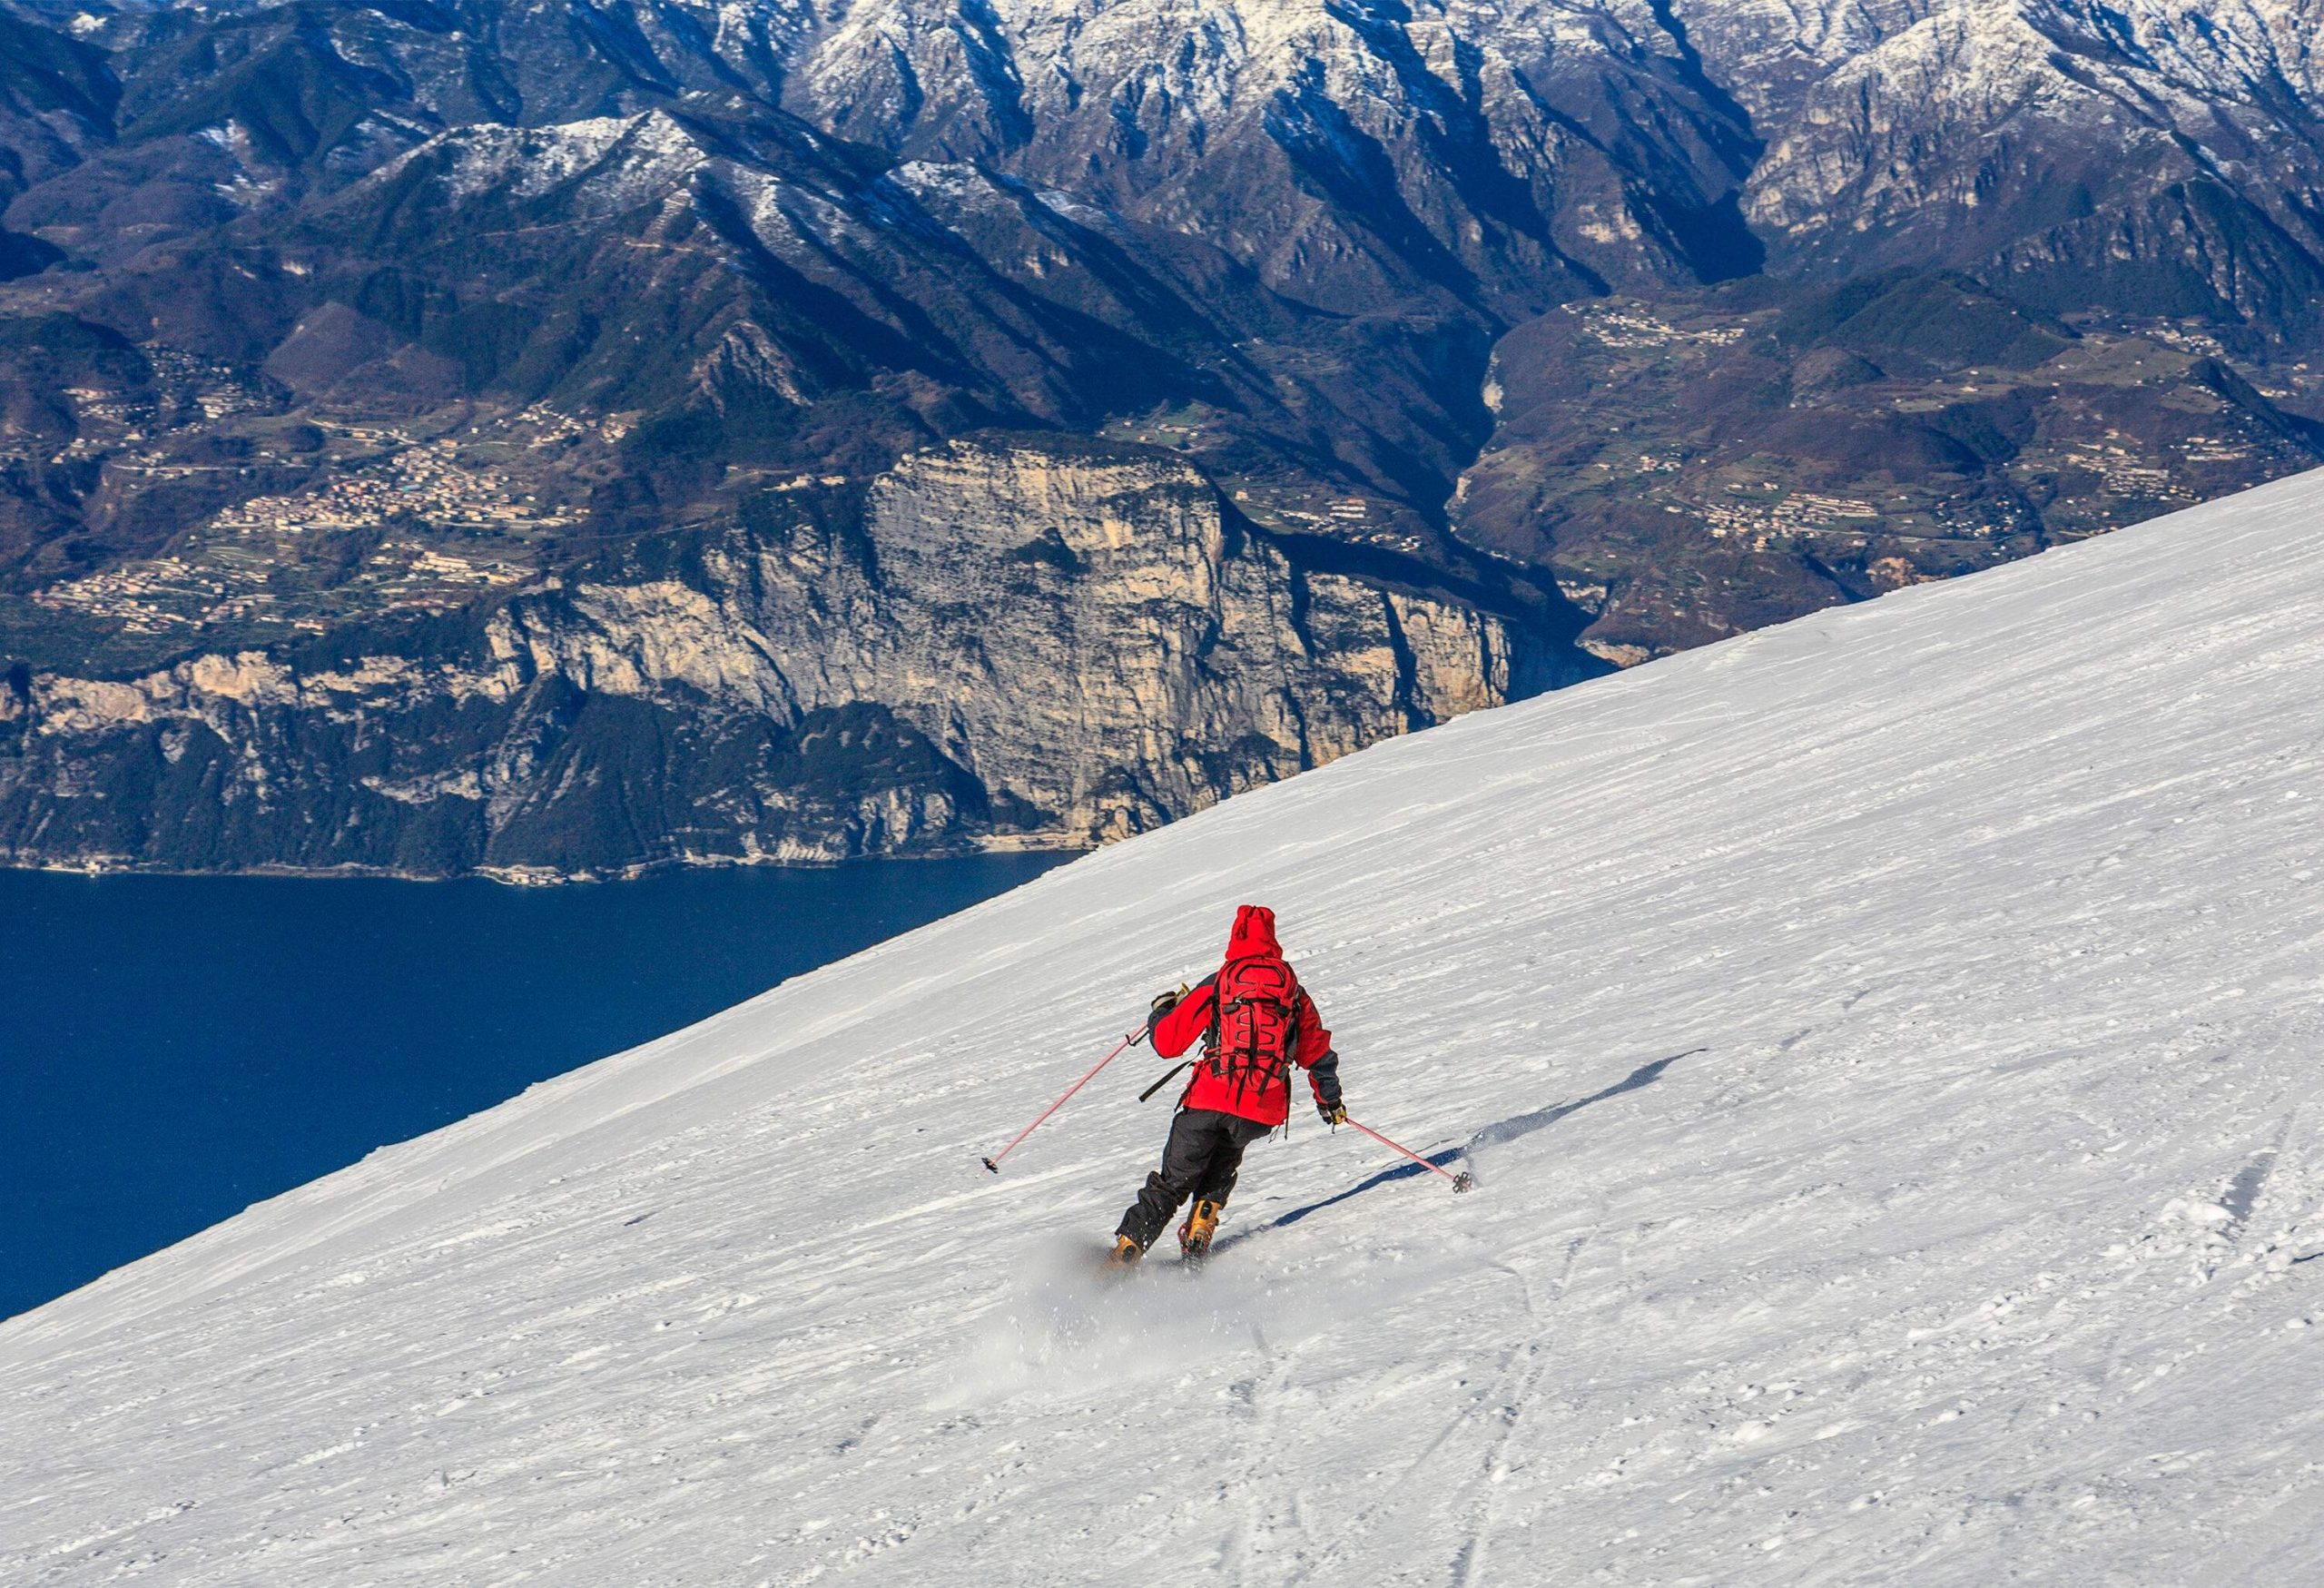 A skier in a red jacket gliding down a hill with a view of the blue lake and rocky mountains.